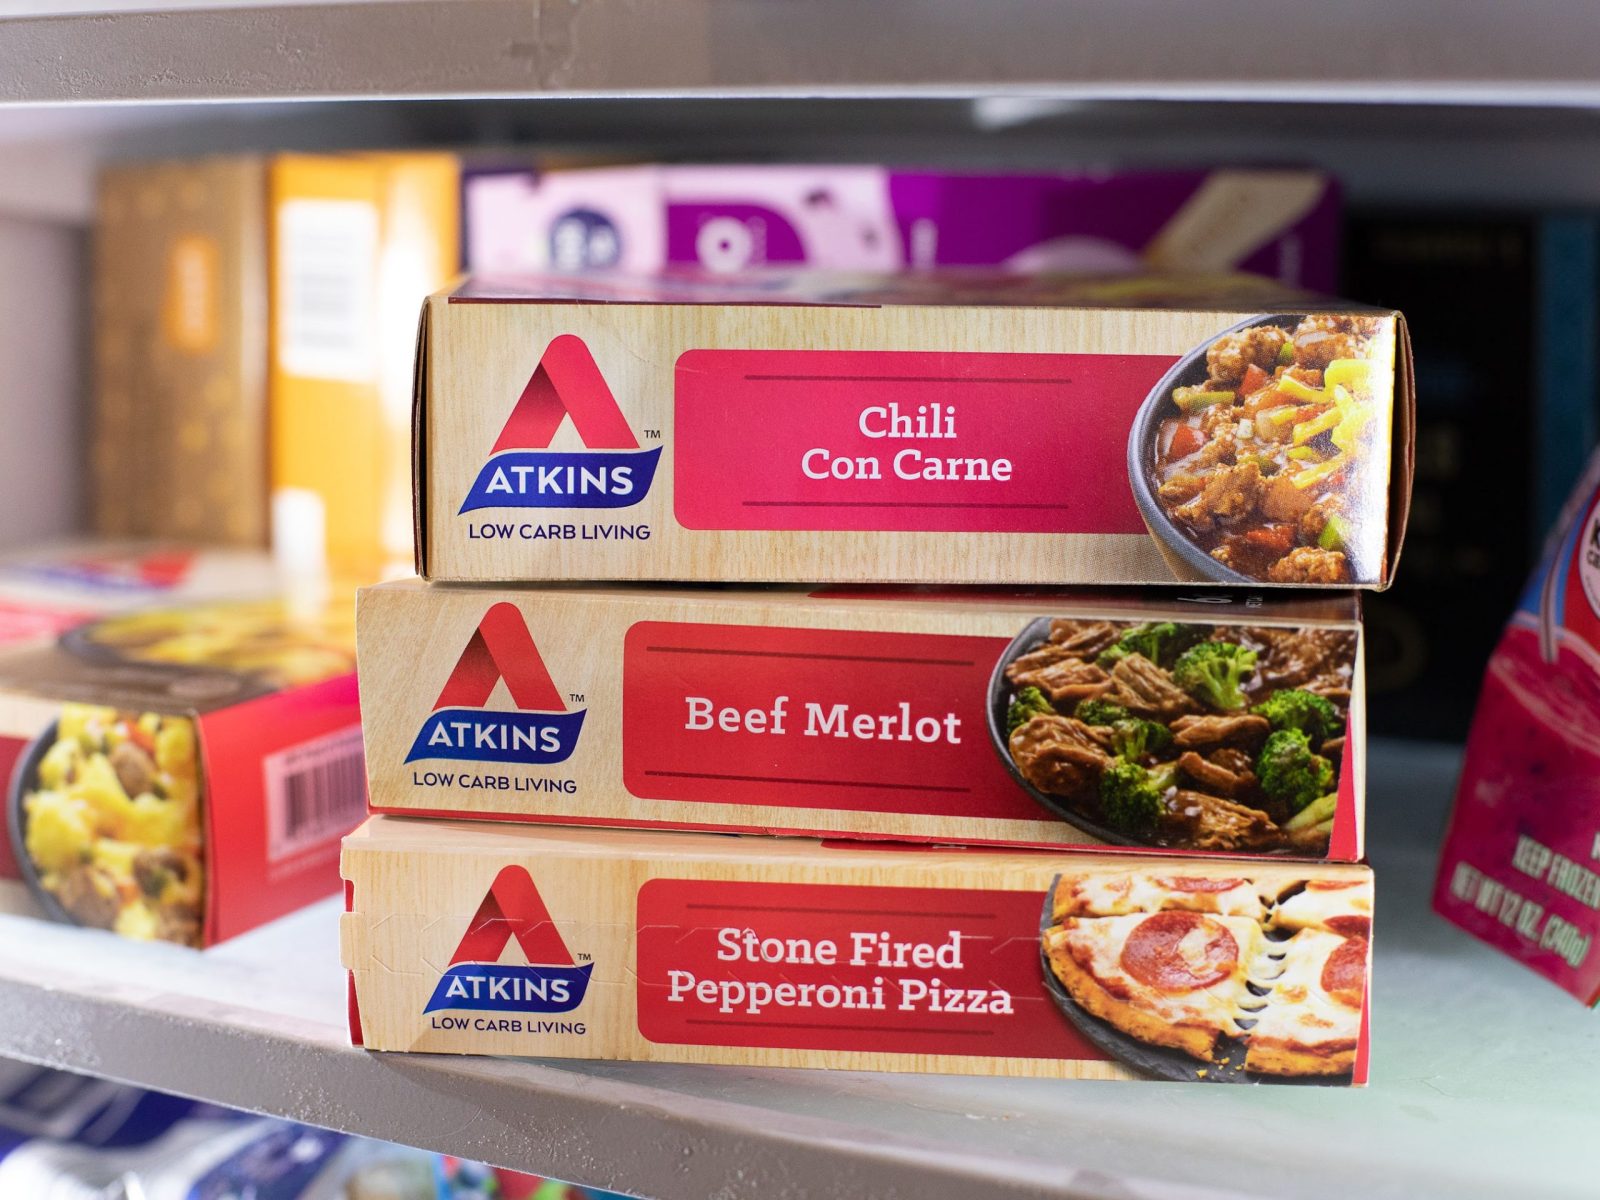 Atkins Entrees As Low As 29¢ At Publix